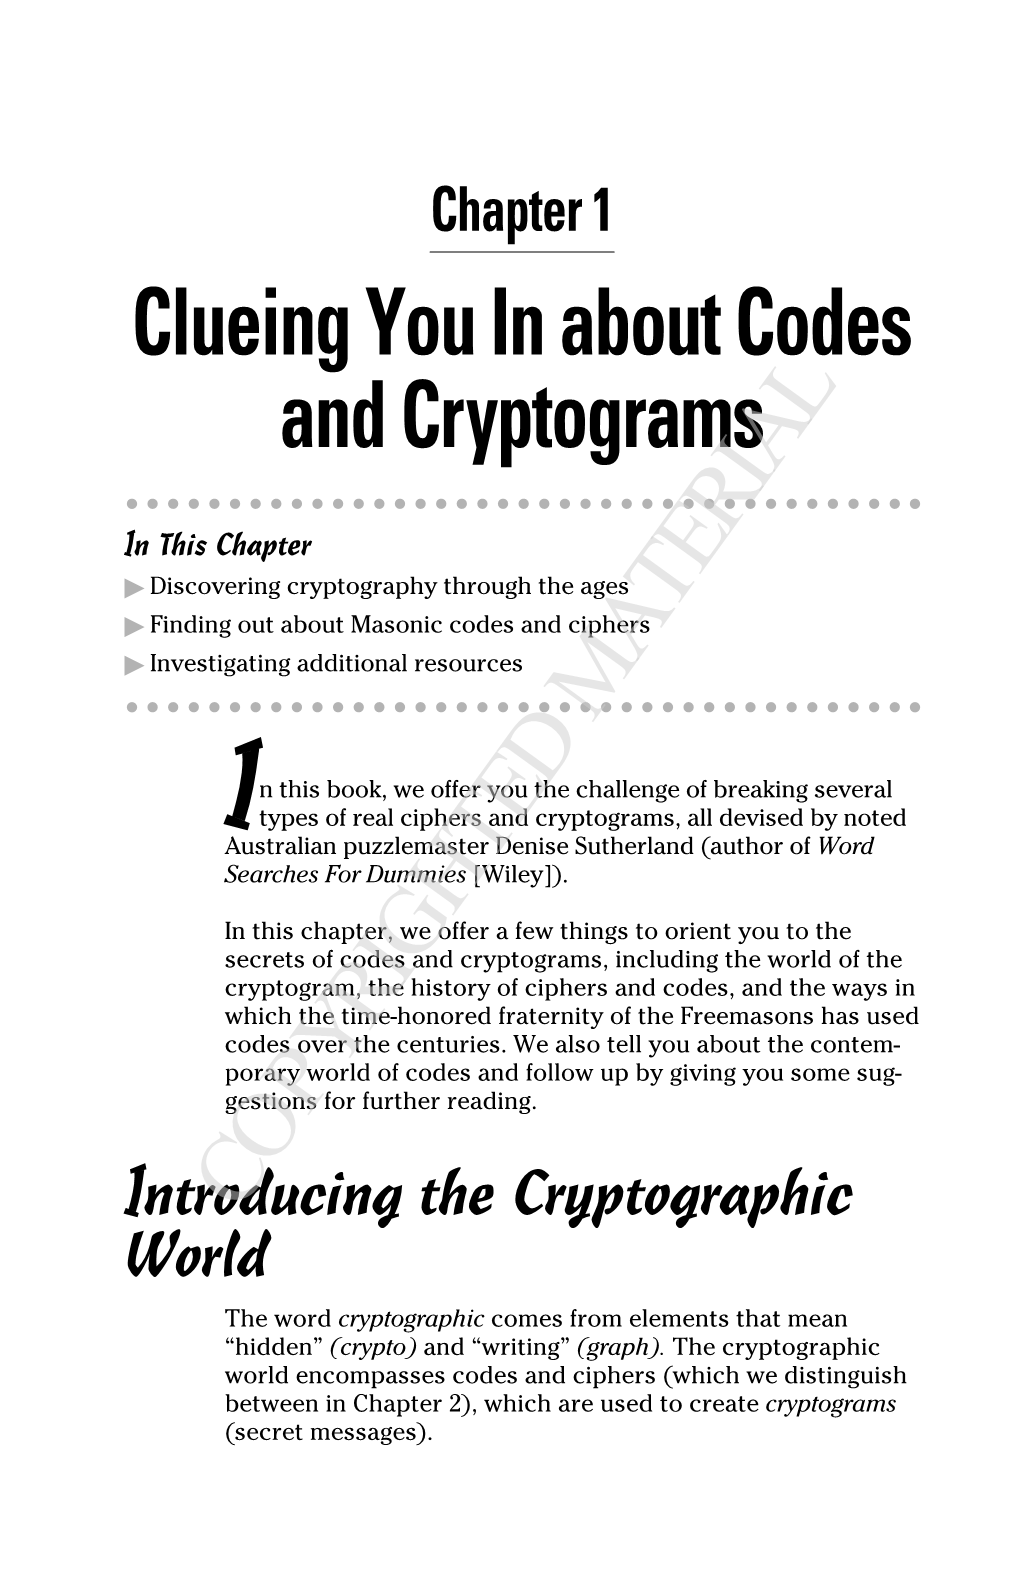 Clueing You in About Codes and Cryptograms